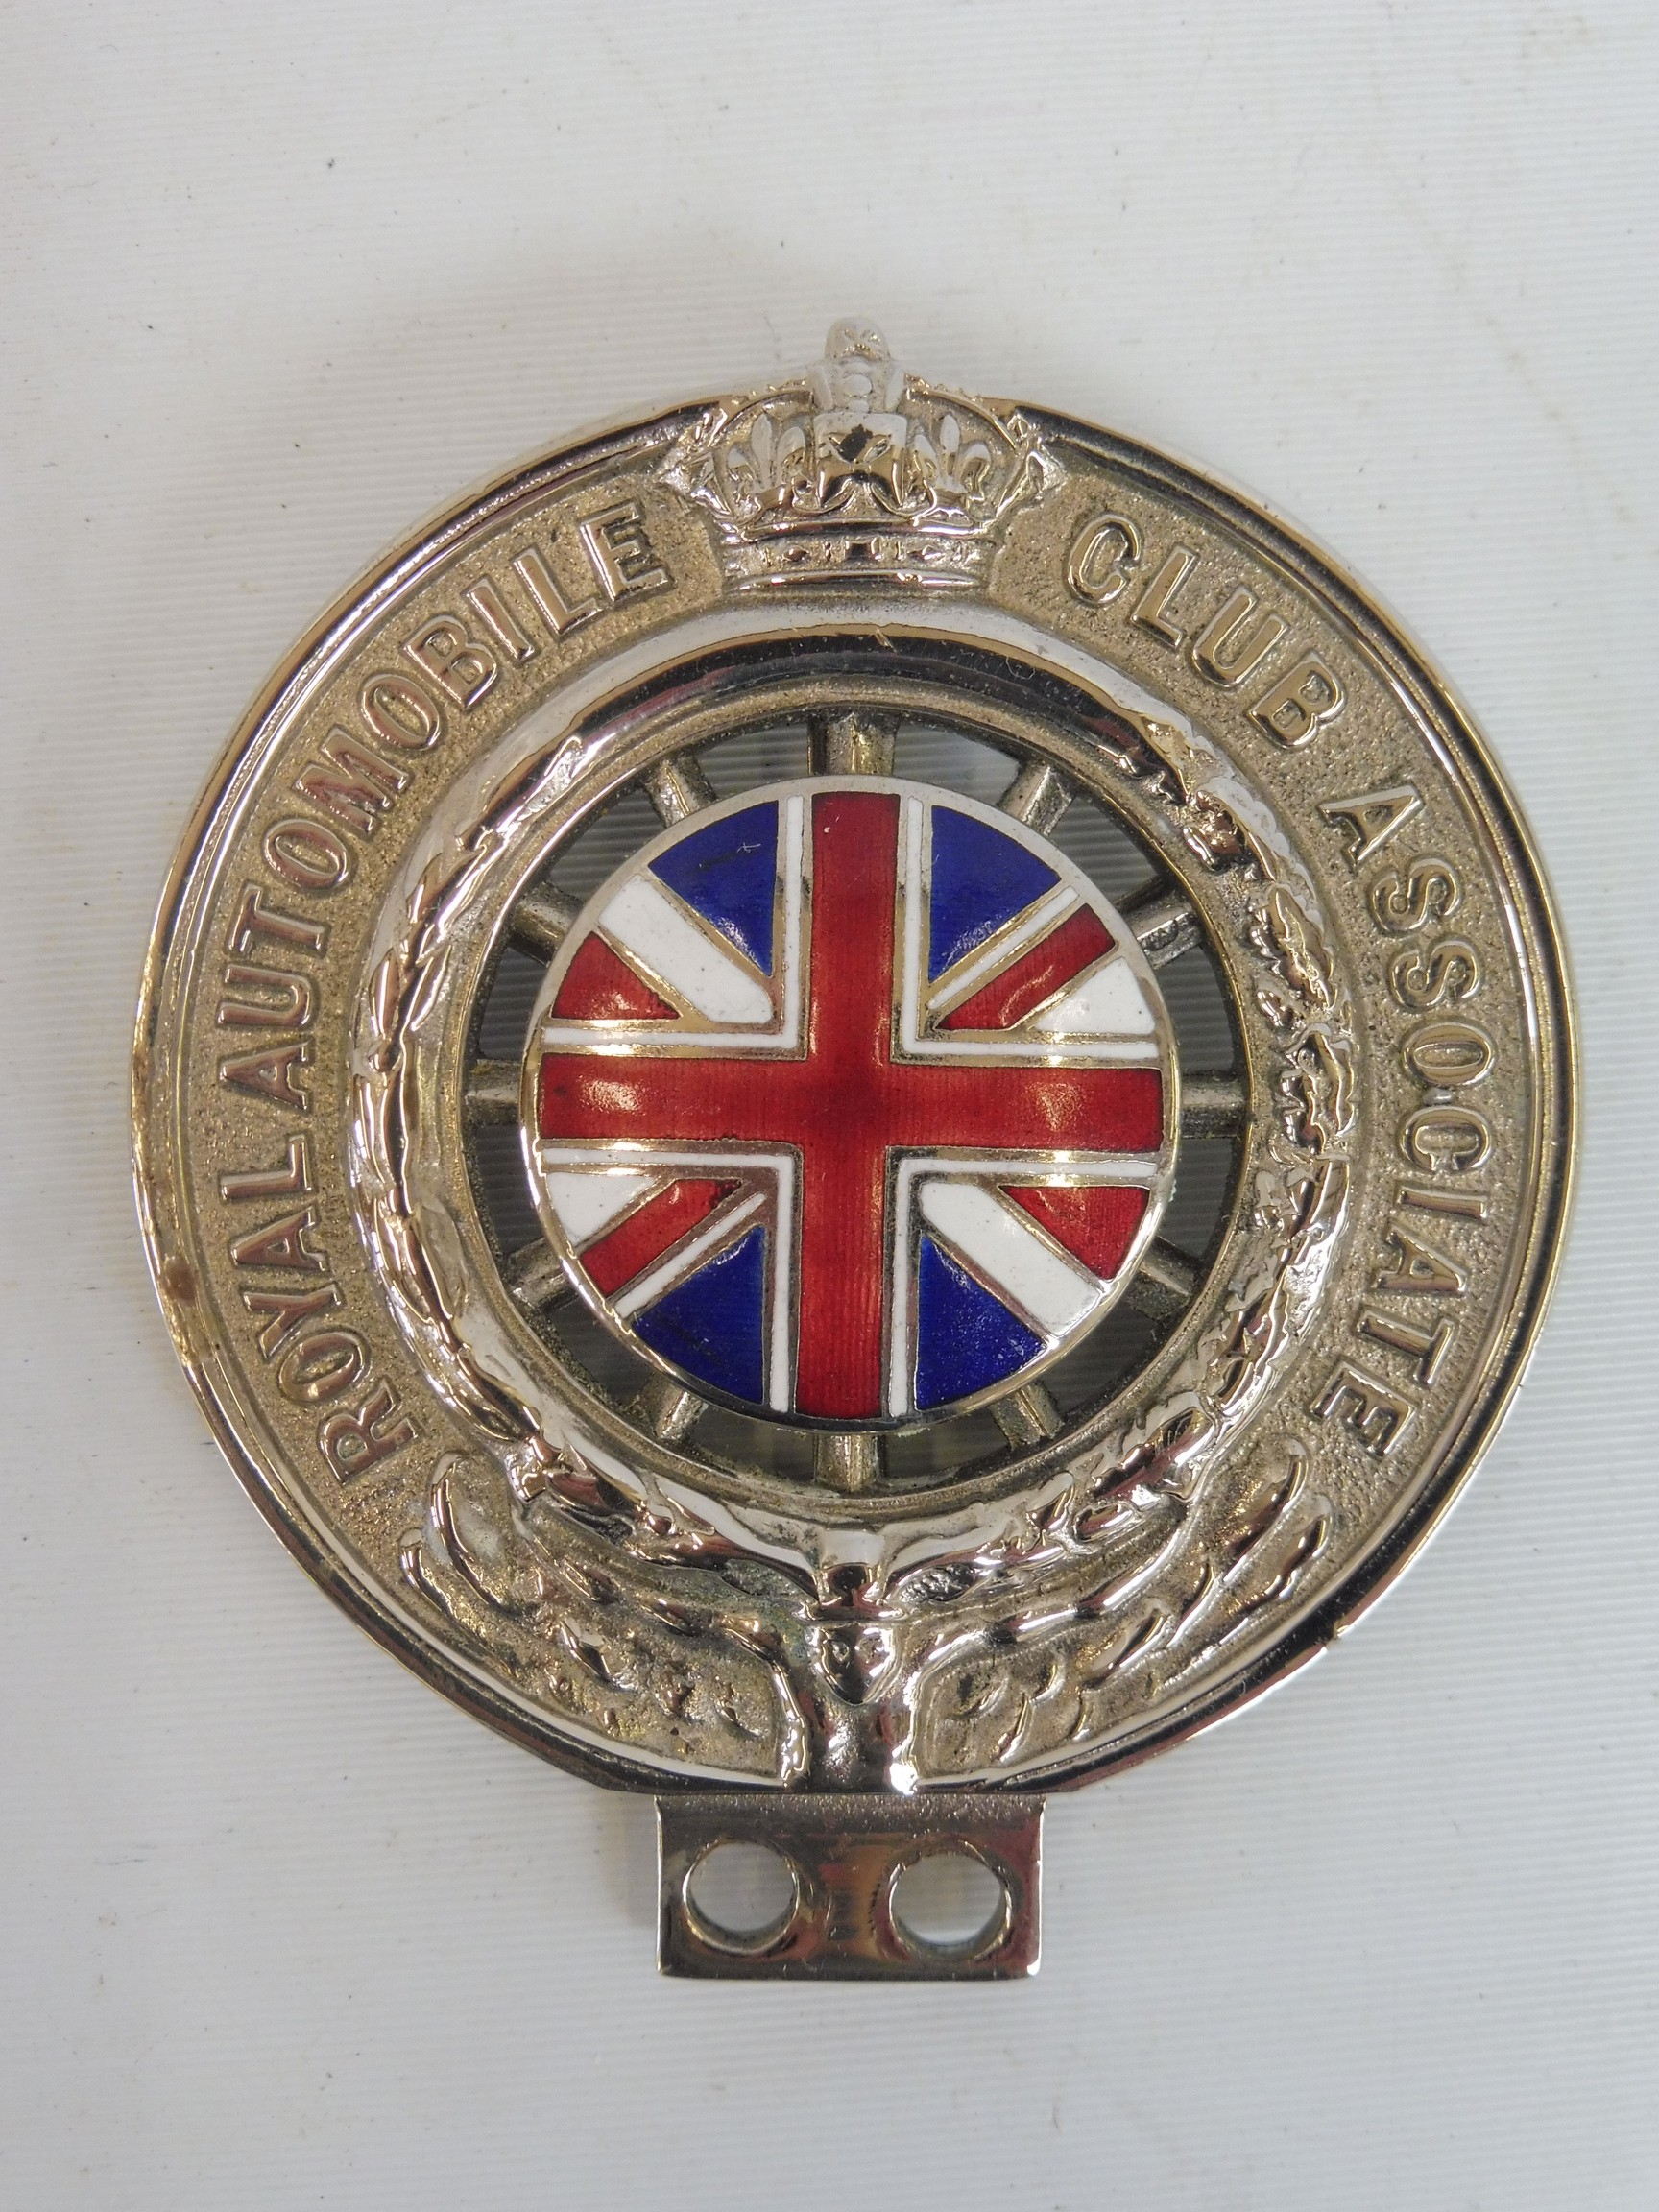 A Royal Automobile Club Associate badge, possibly motorcycle, nickel plated brass, with enamel union